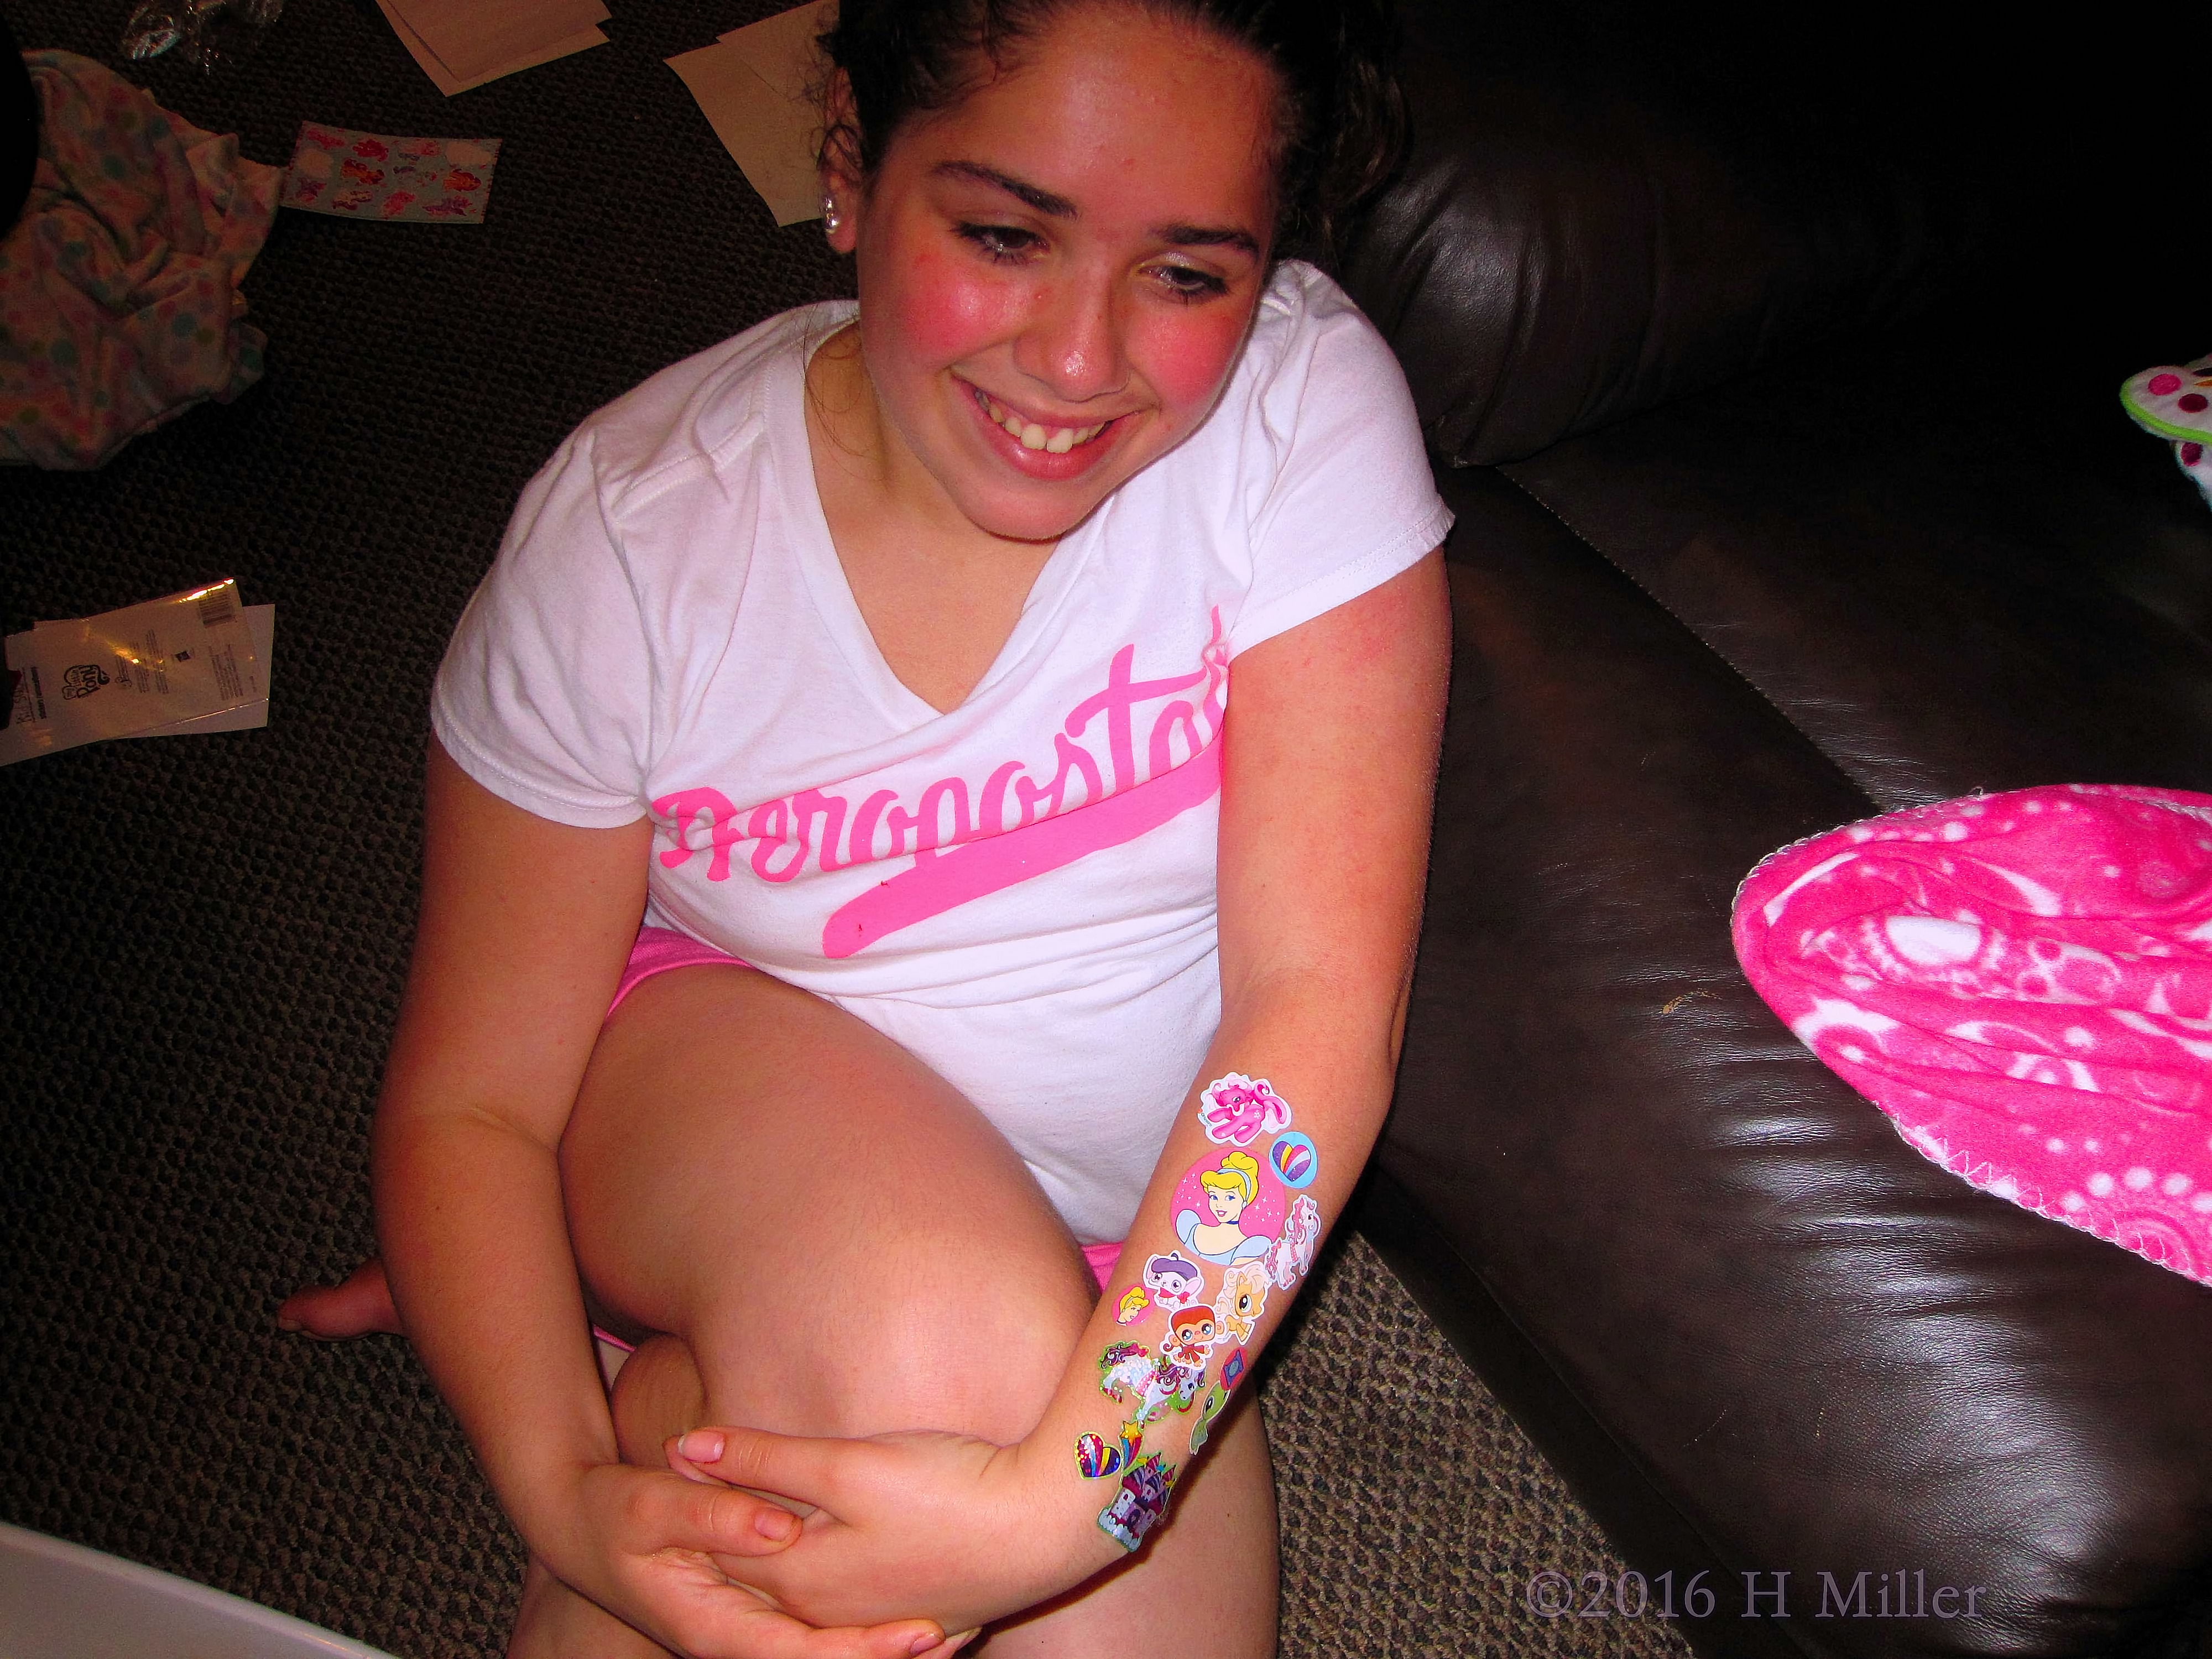 Smiling In Her Homemade Girls Spa Party Sticker Tattoo 